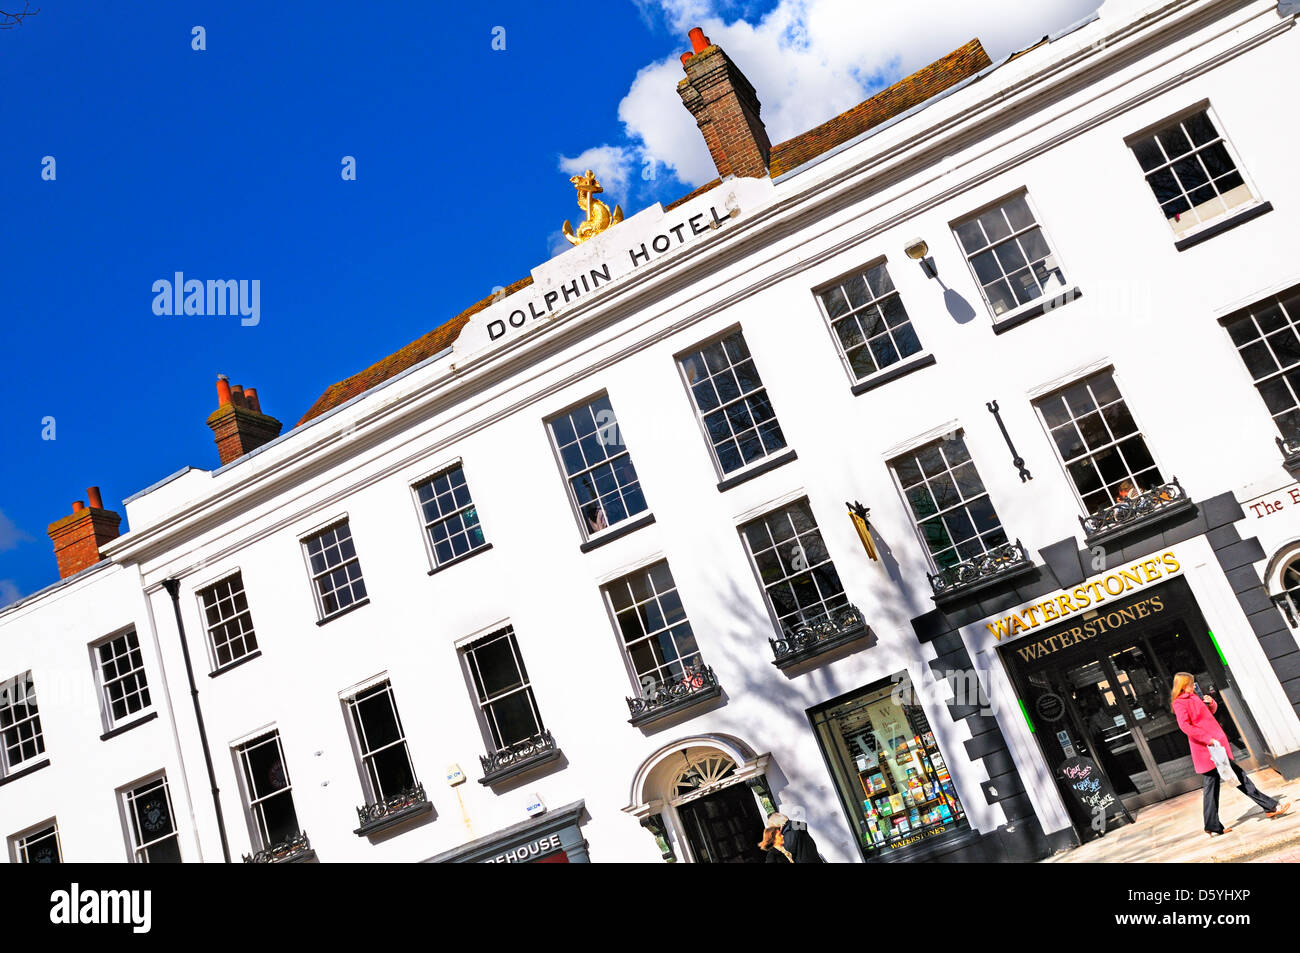 Dolphin Hotel, Chichester, West Sussex, England, UK Stockfoto